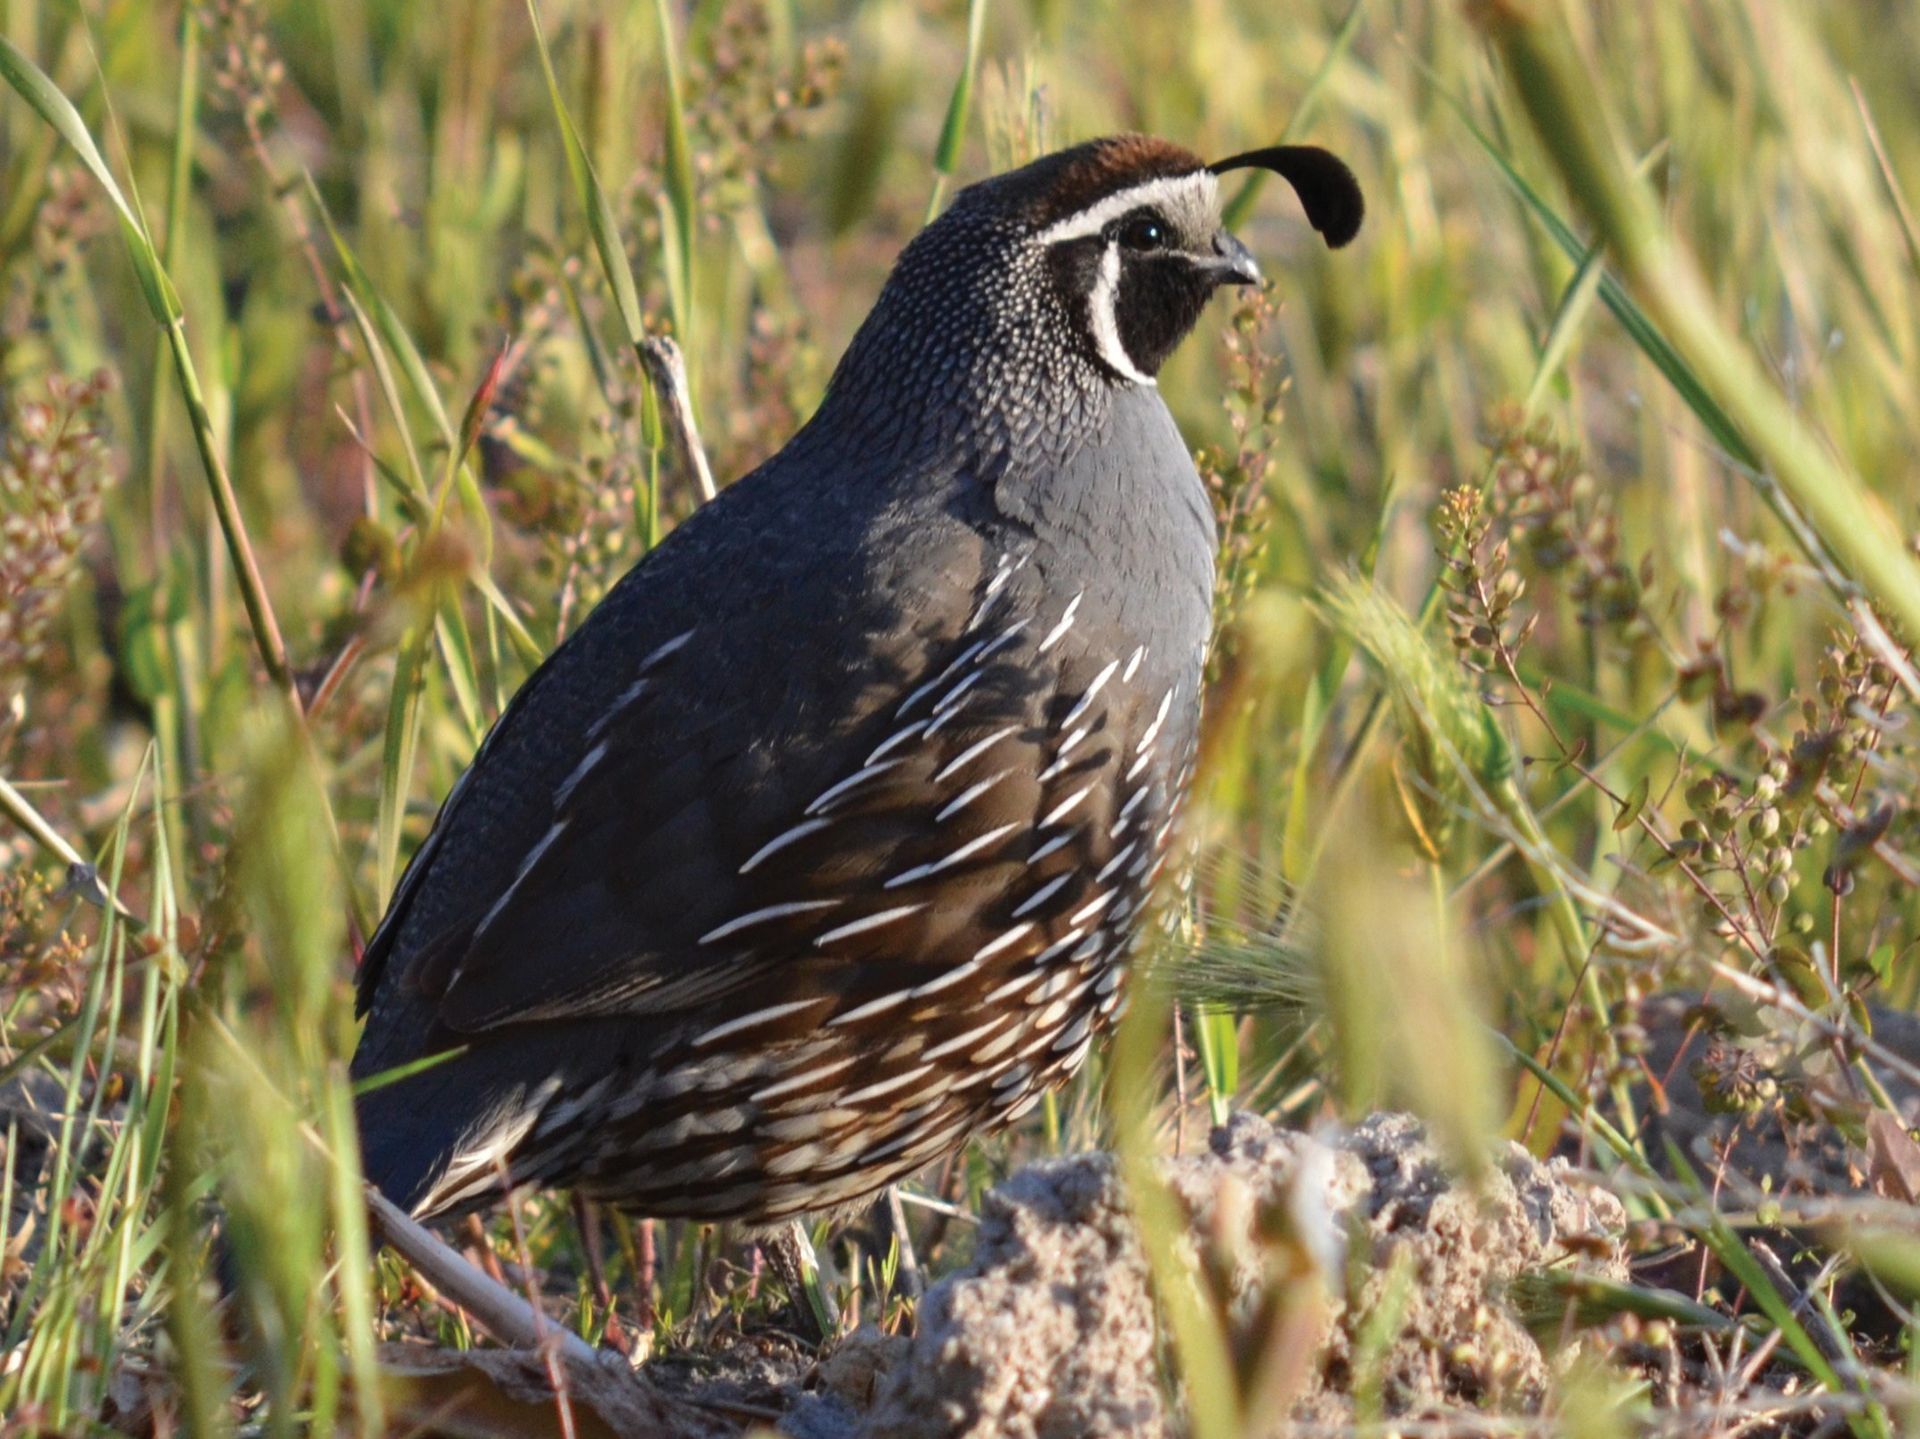 A quail standing in the grass.